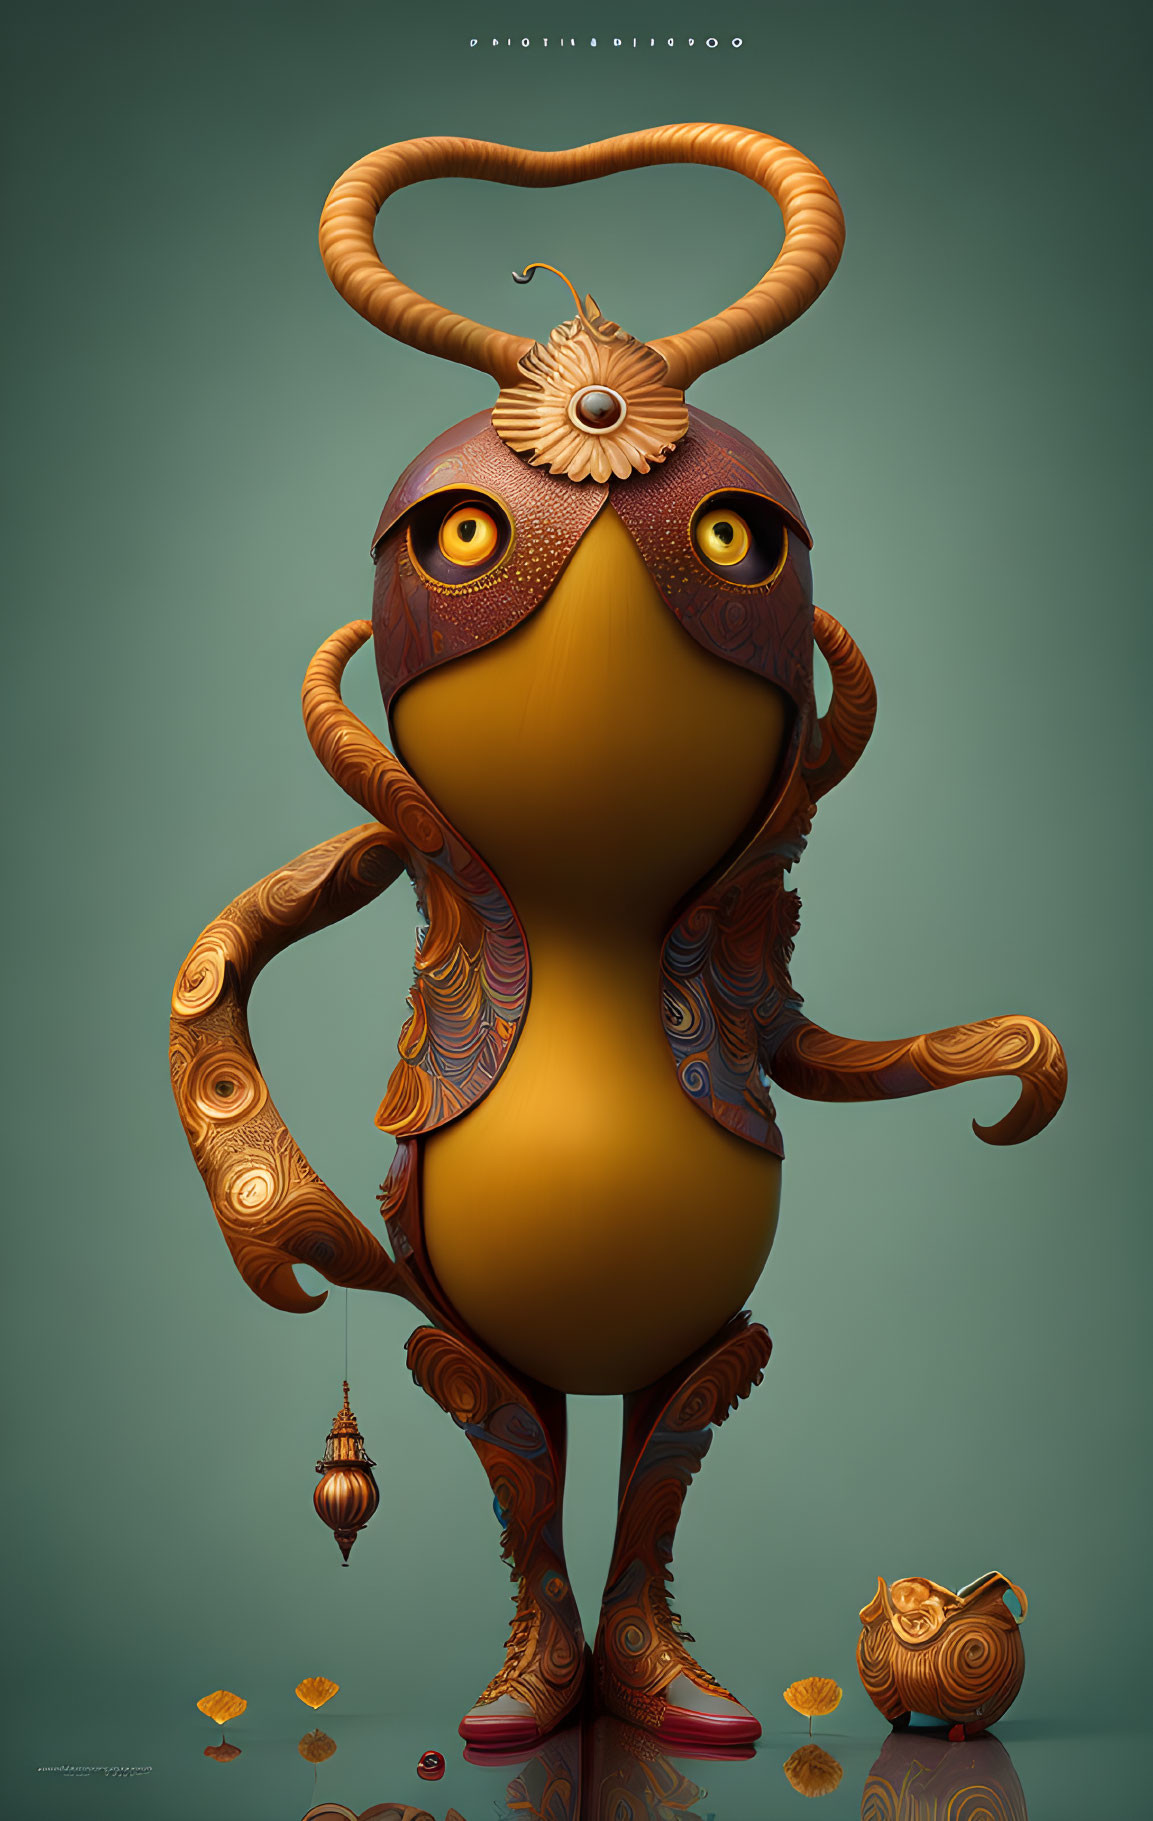 Digital artwork featuring anthropomorphic owl character with ornate patterns, lantern, and leaves